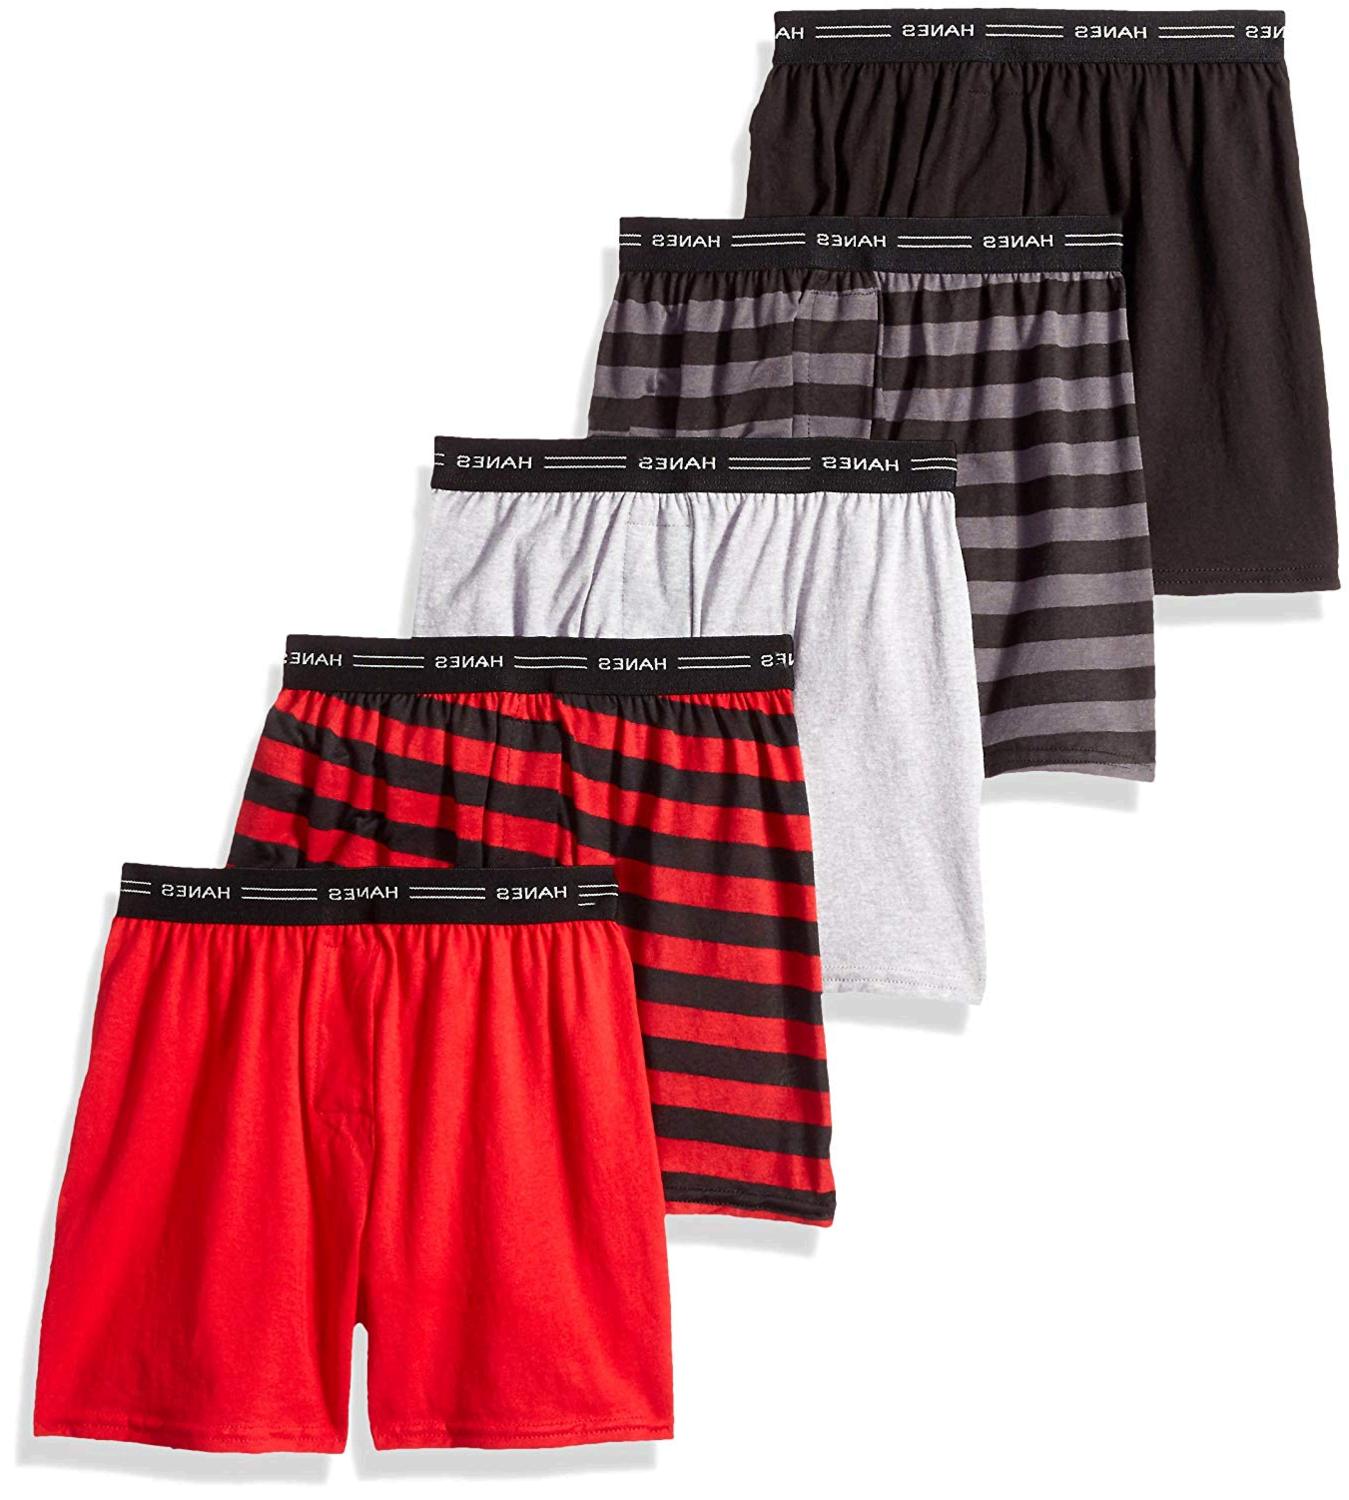 Hanes Boys' 5-Pack Comfort Flex Knit Boxer, Assorted,, Assorted, Size ...